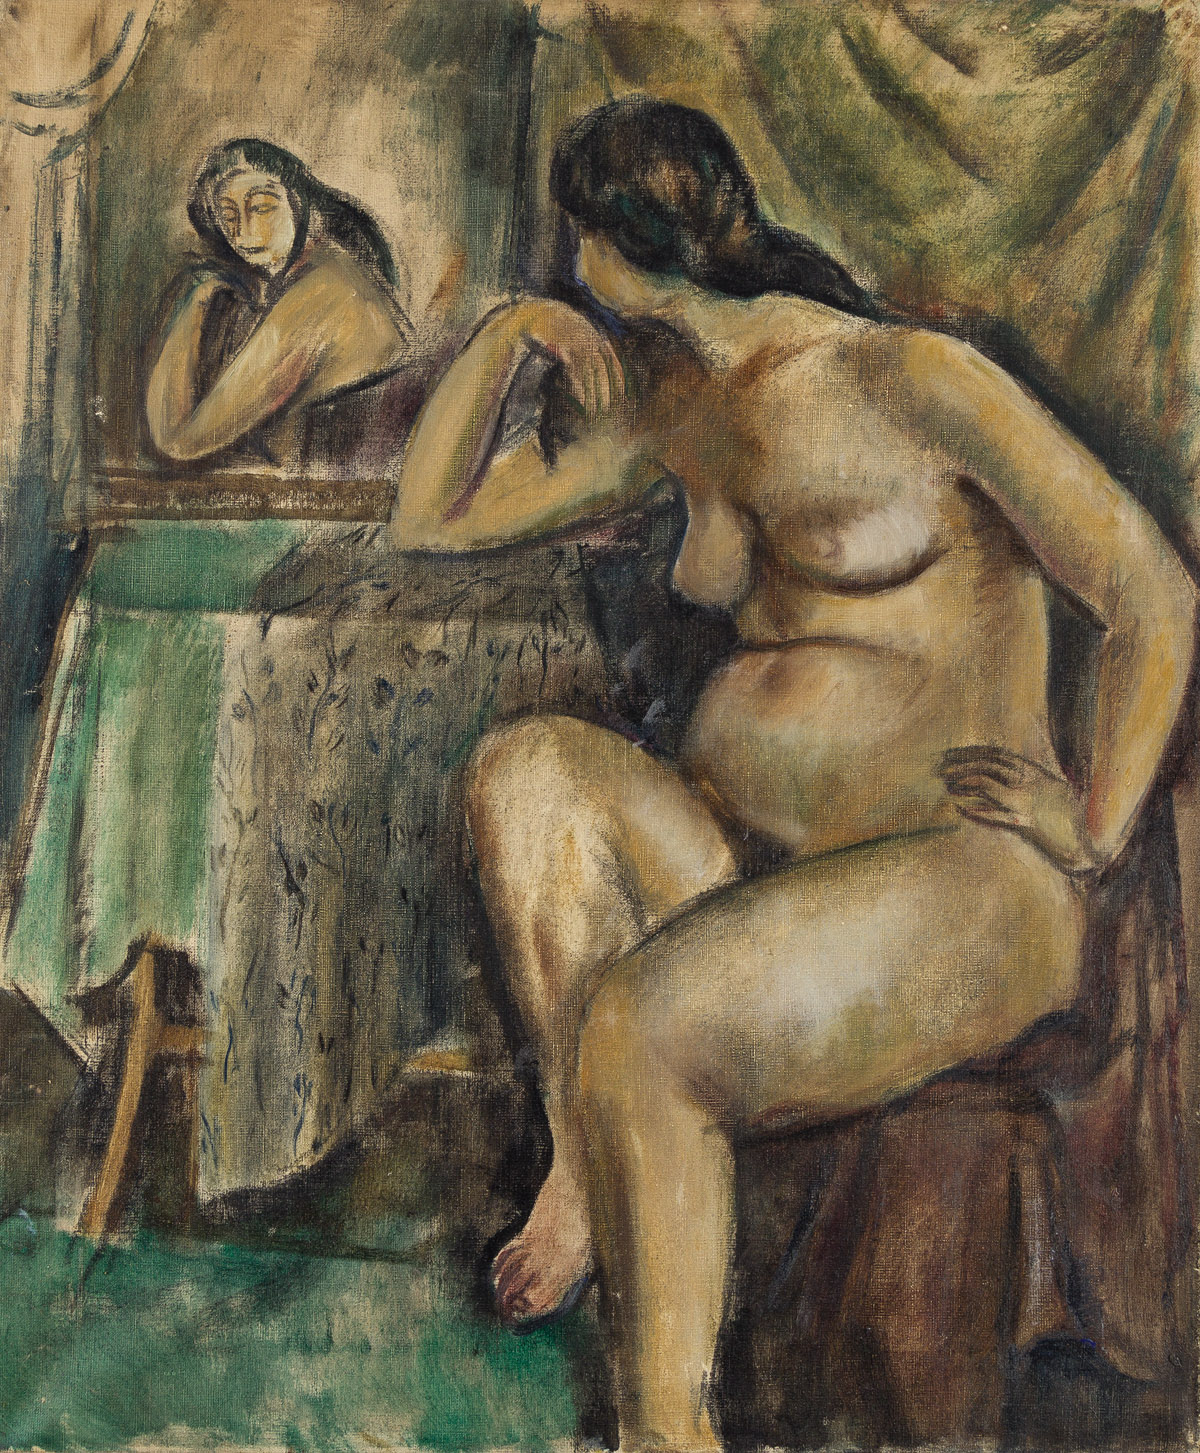 ARNOLD BLANCH (1896-1968) Untitled, (Seated Nude).